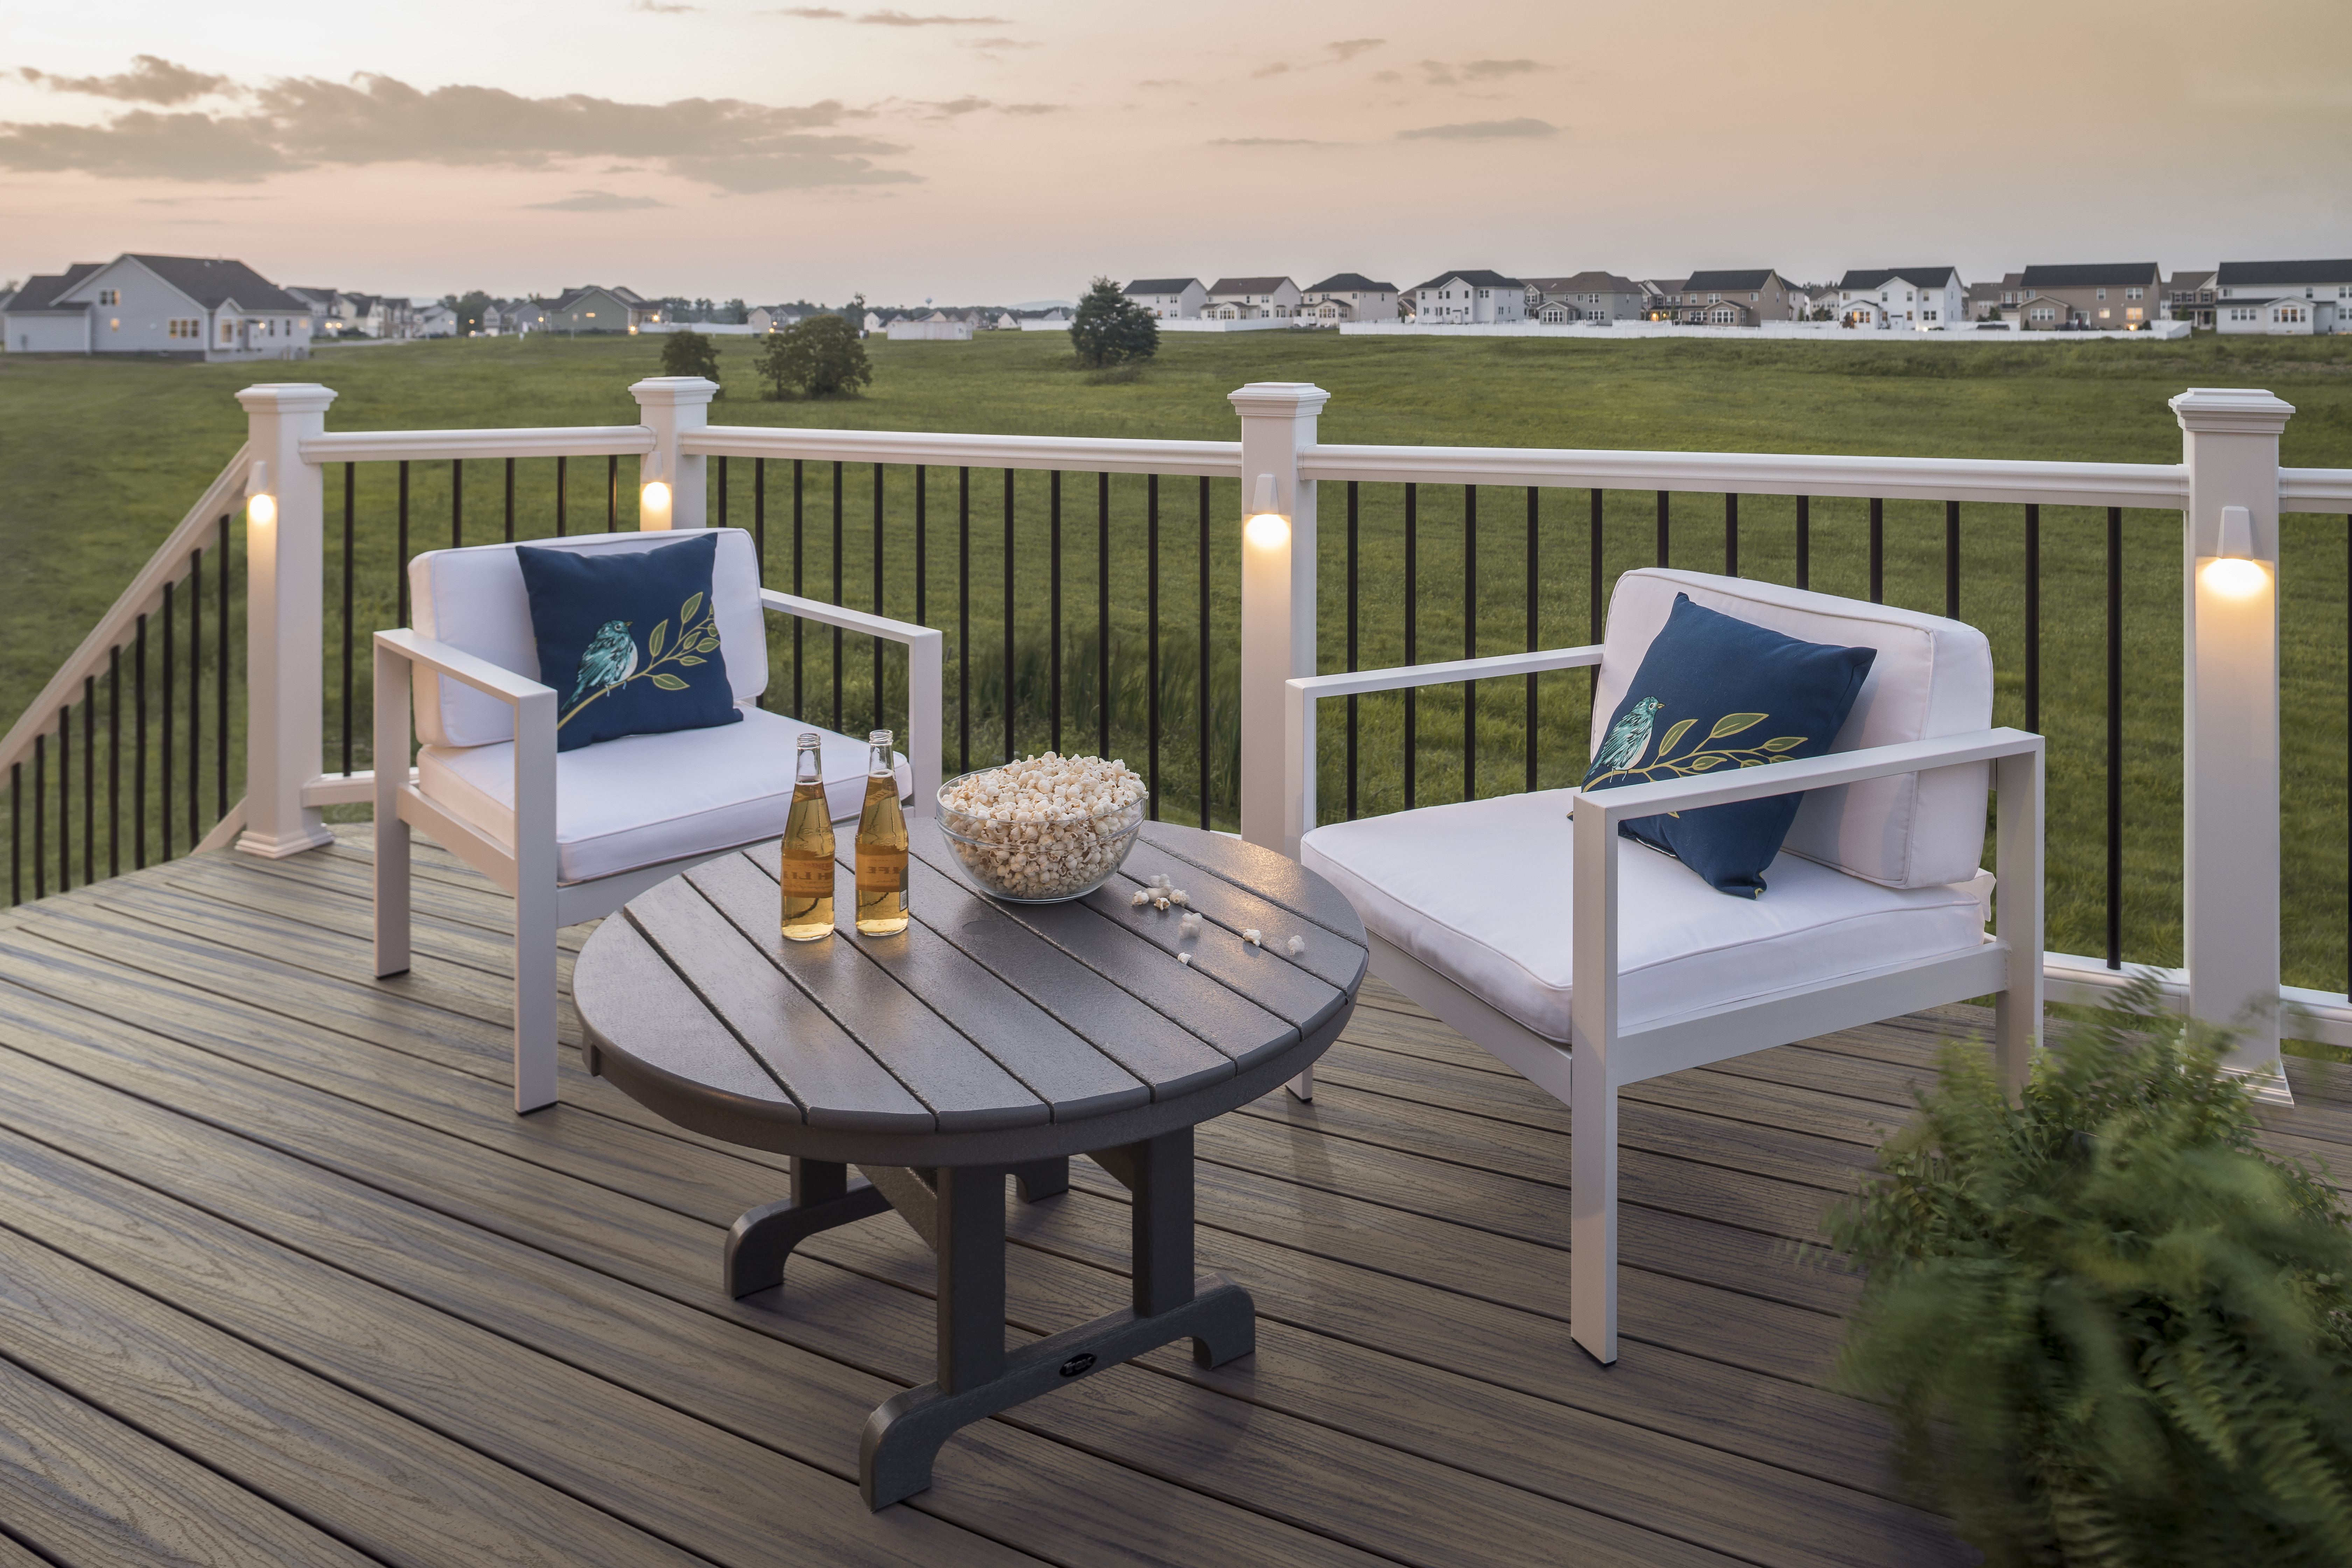 Aspirational And Affordable: Meet The New Trex Decking ...